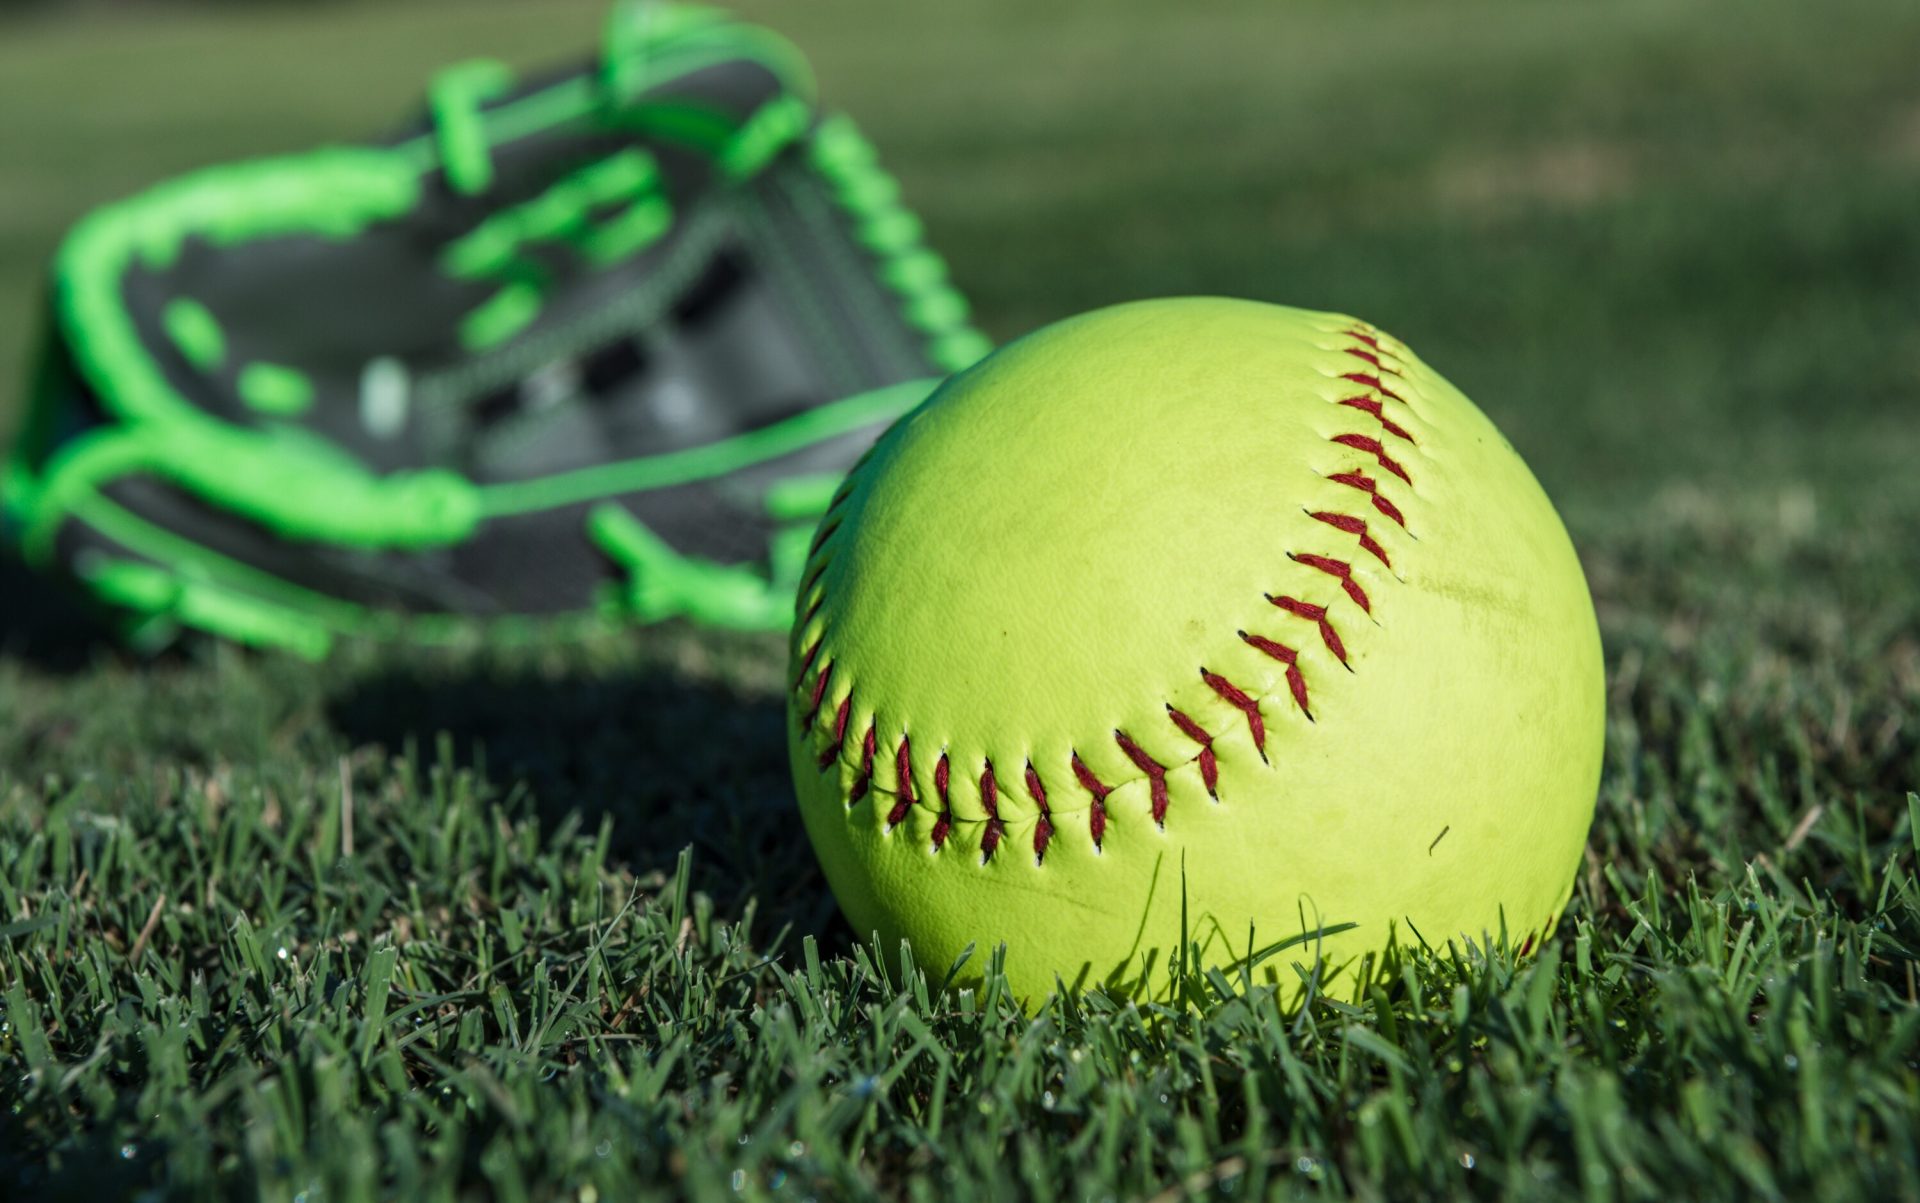 Softball Strategies For The Young Athlete: A Guide To Becoming A Champion